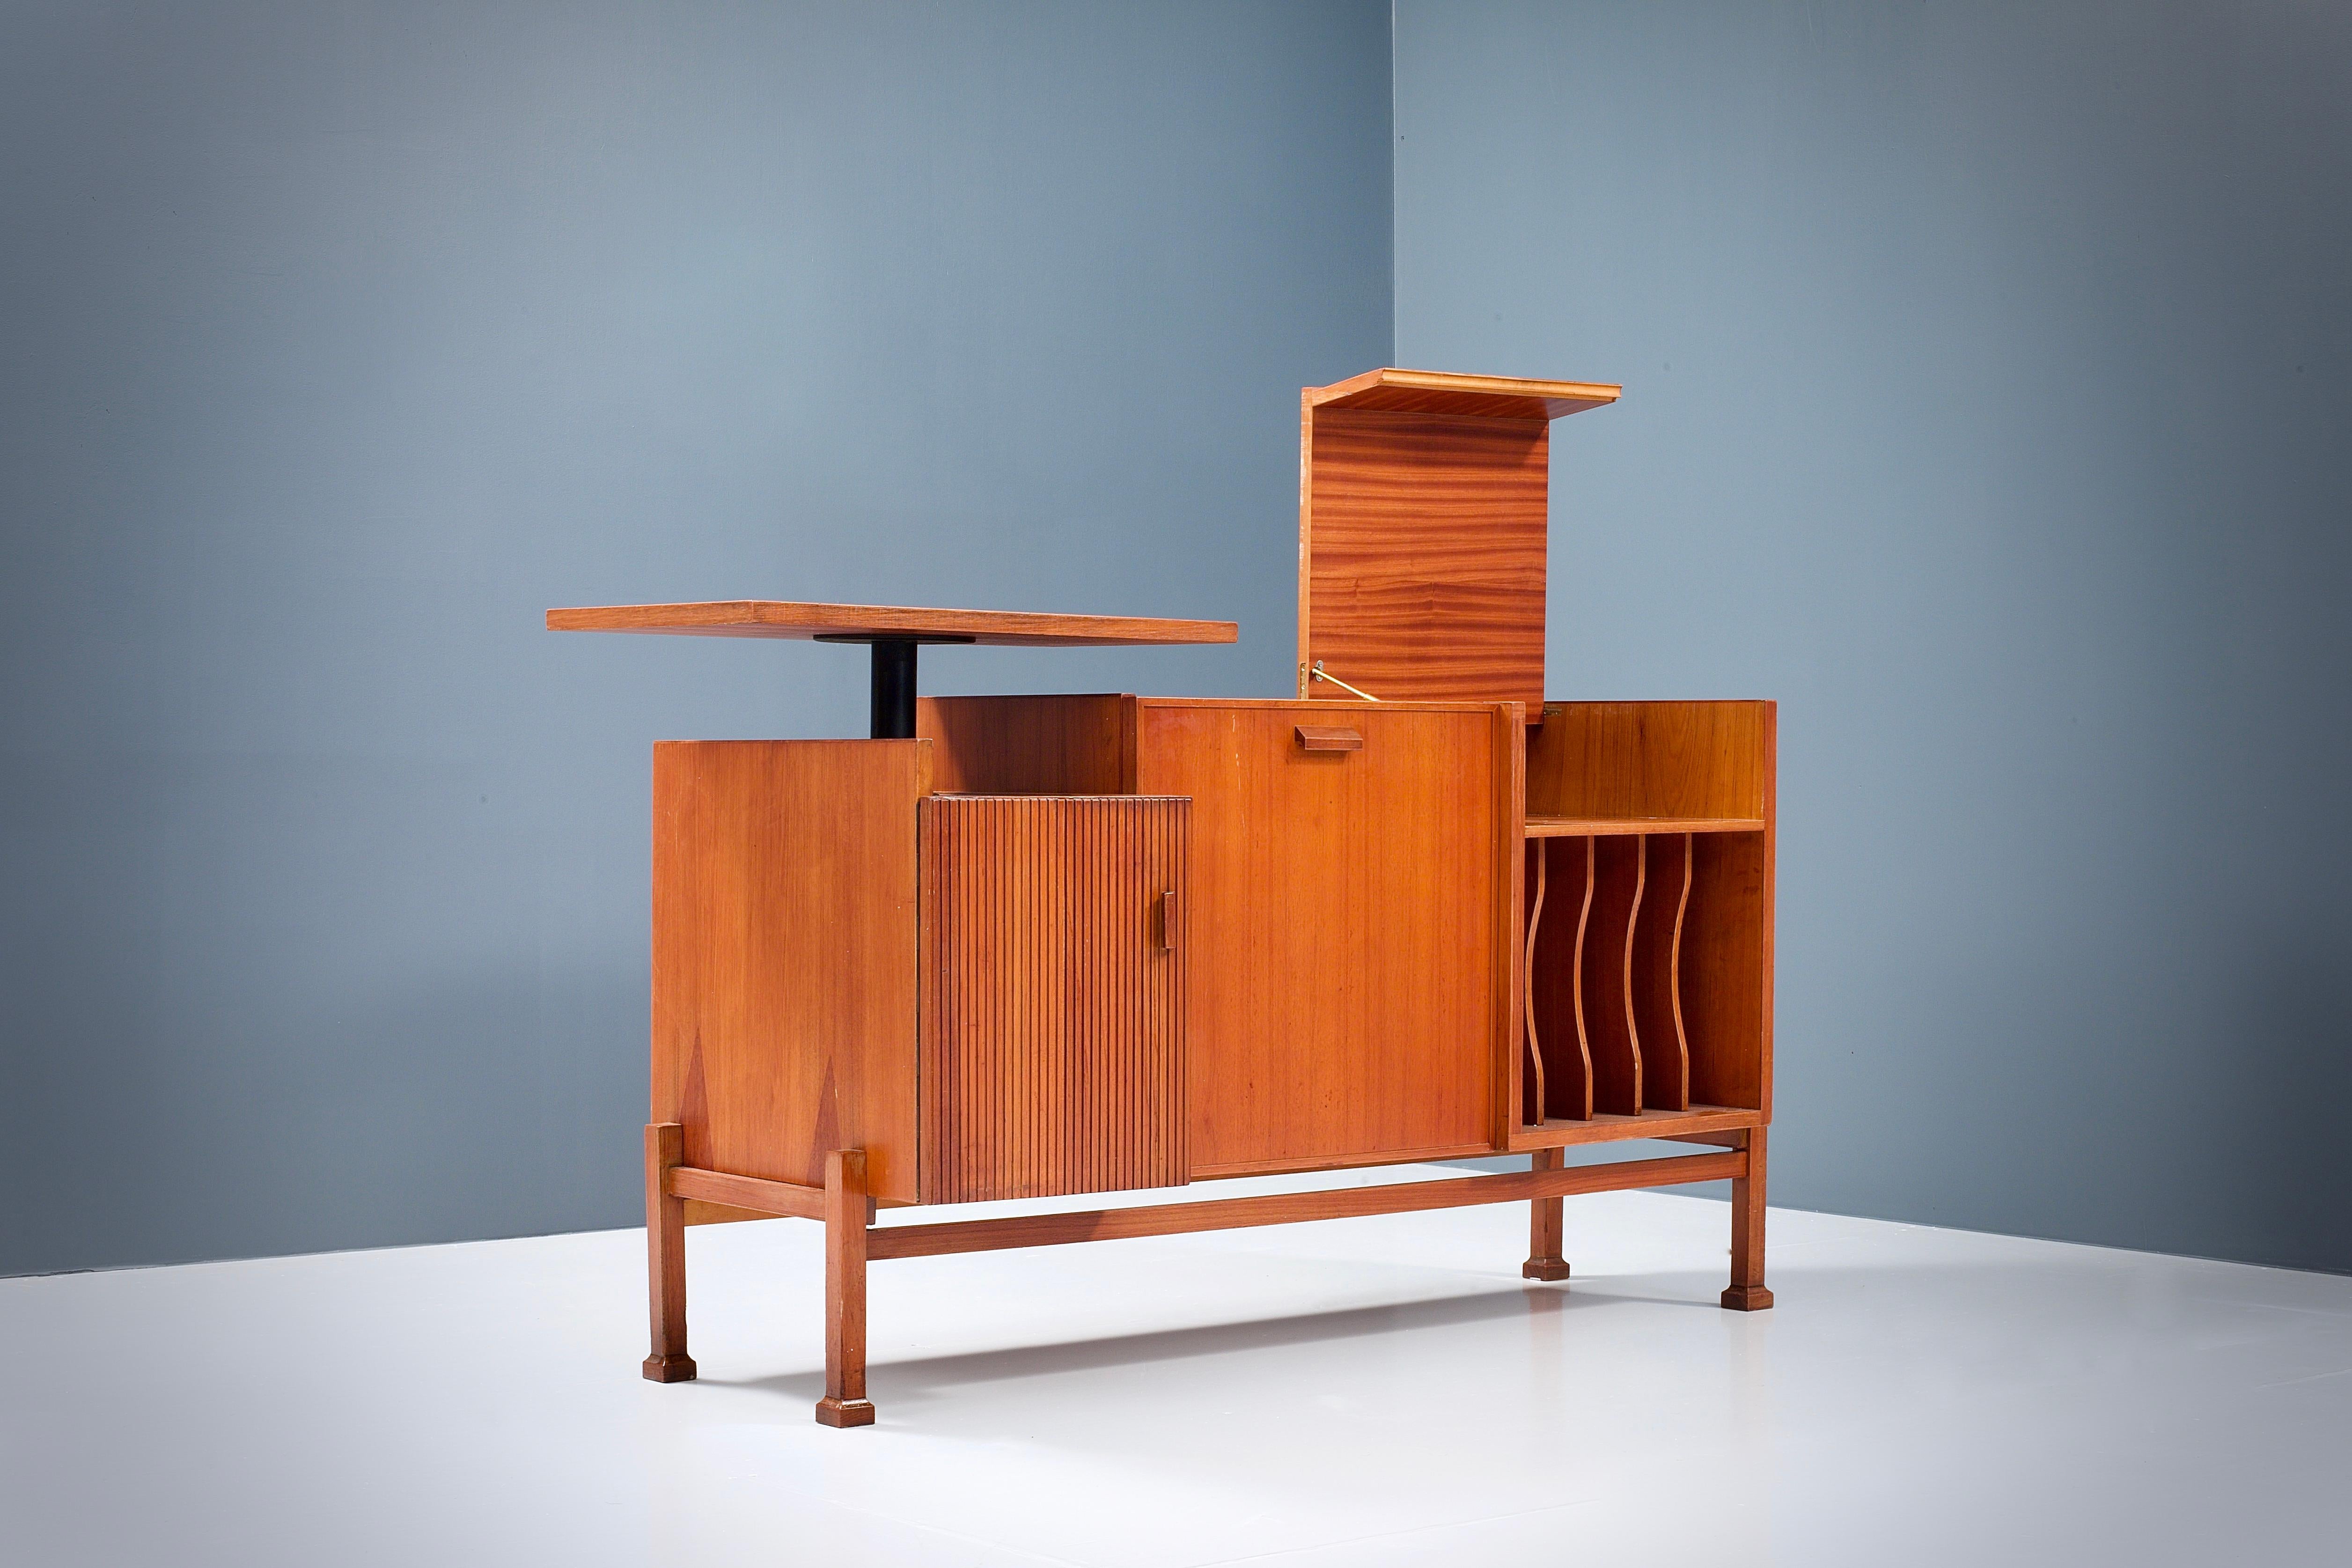 French Geometrical Sideboard / DJ Booth in Patinated Teak, France, 1950s